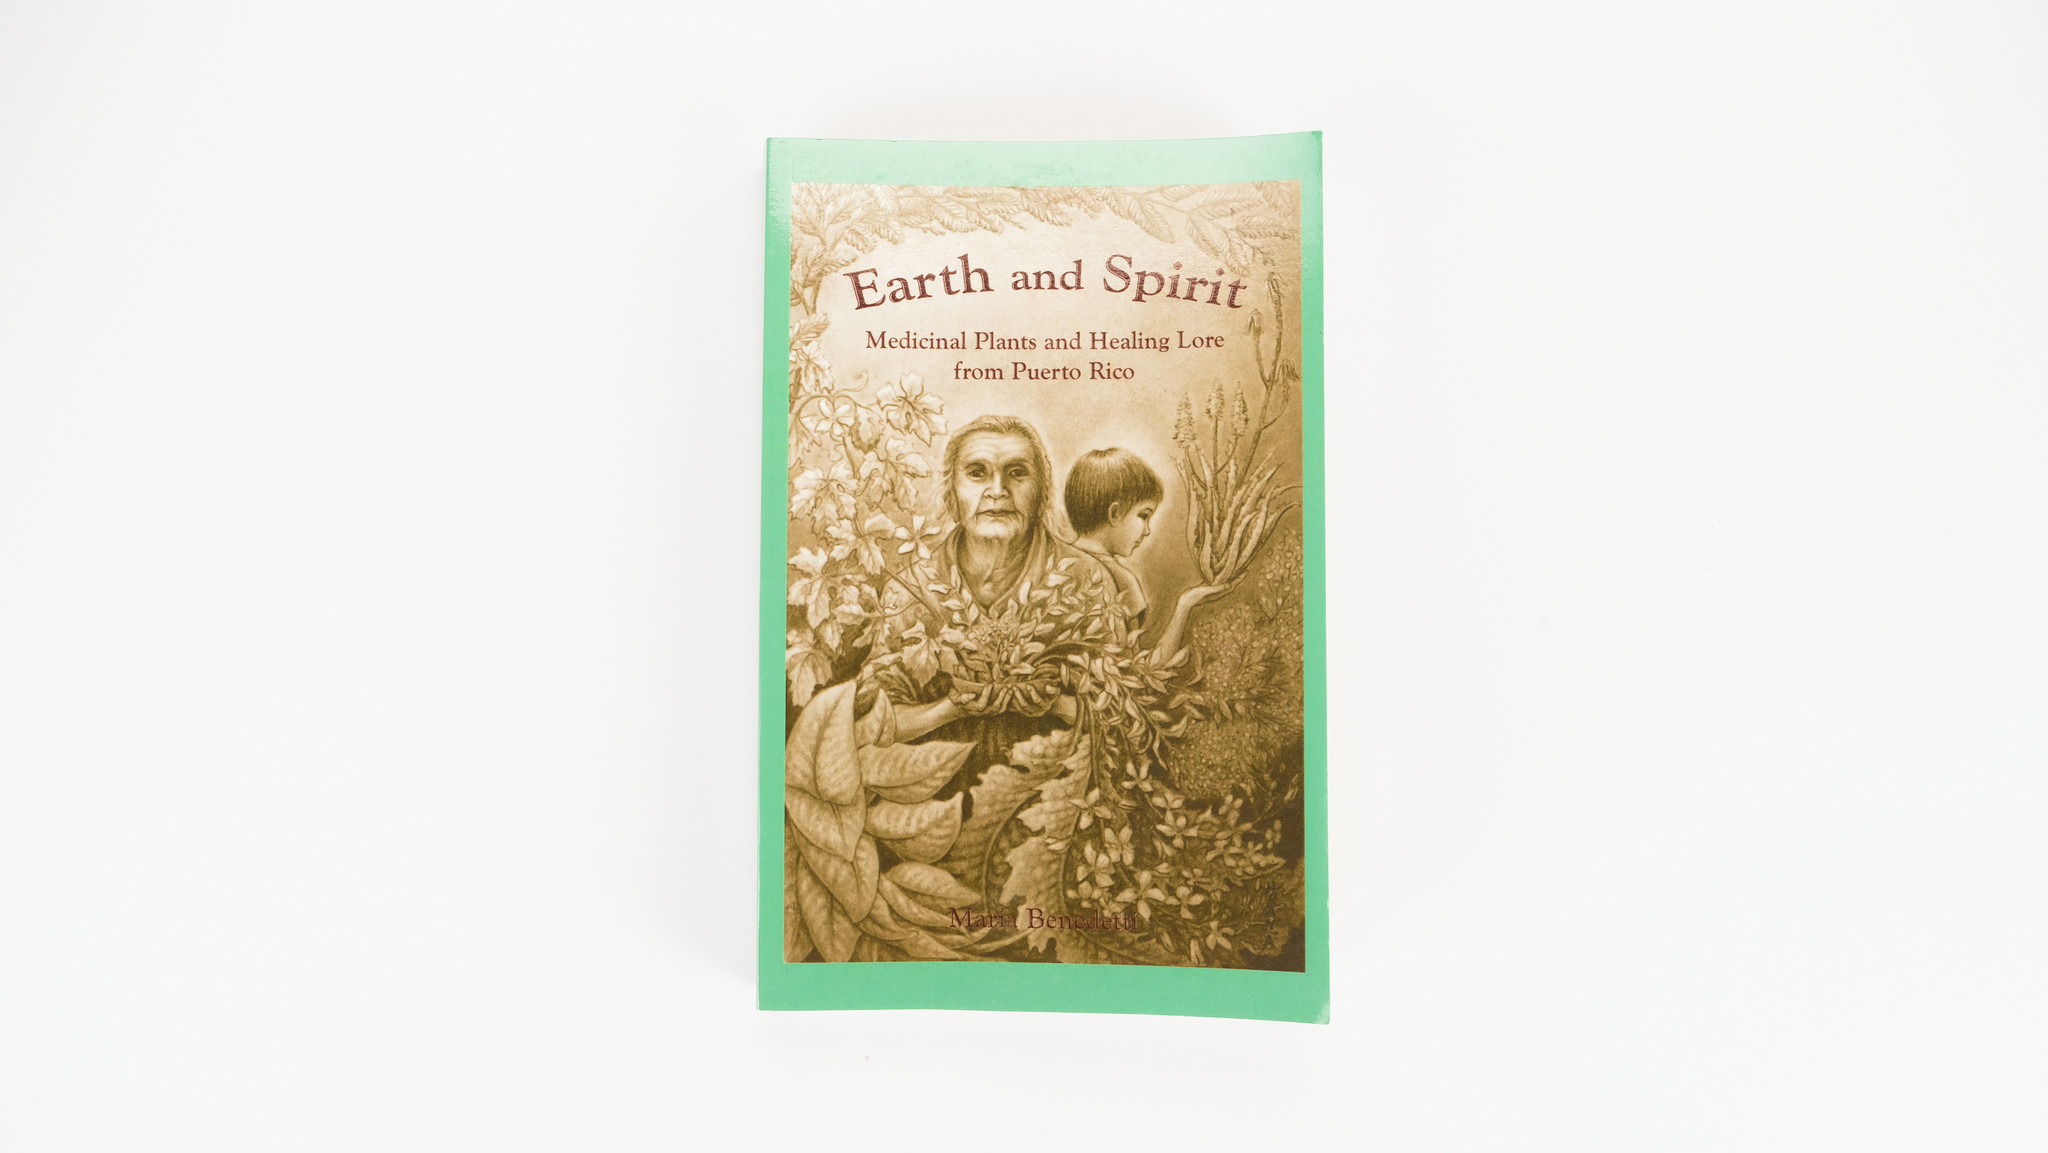 Earth and Spirit - Medicinal Plants and Healing Lore from Puerto Rico